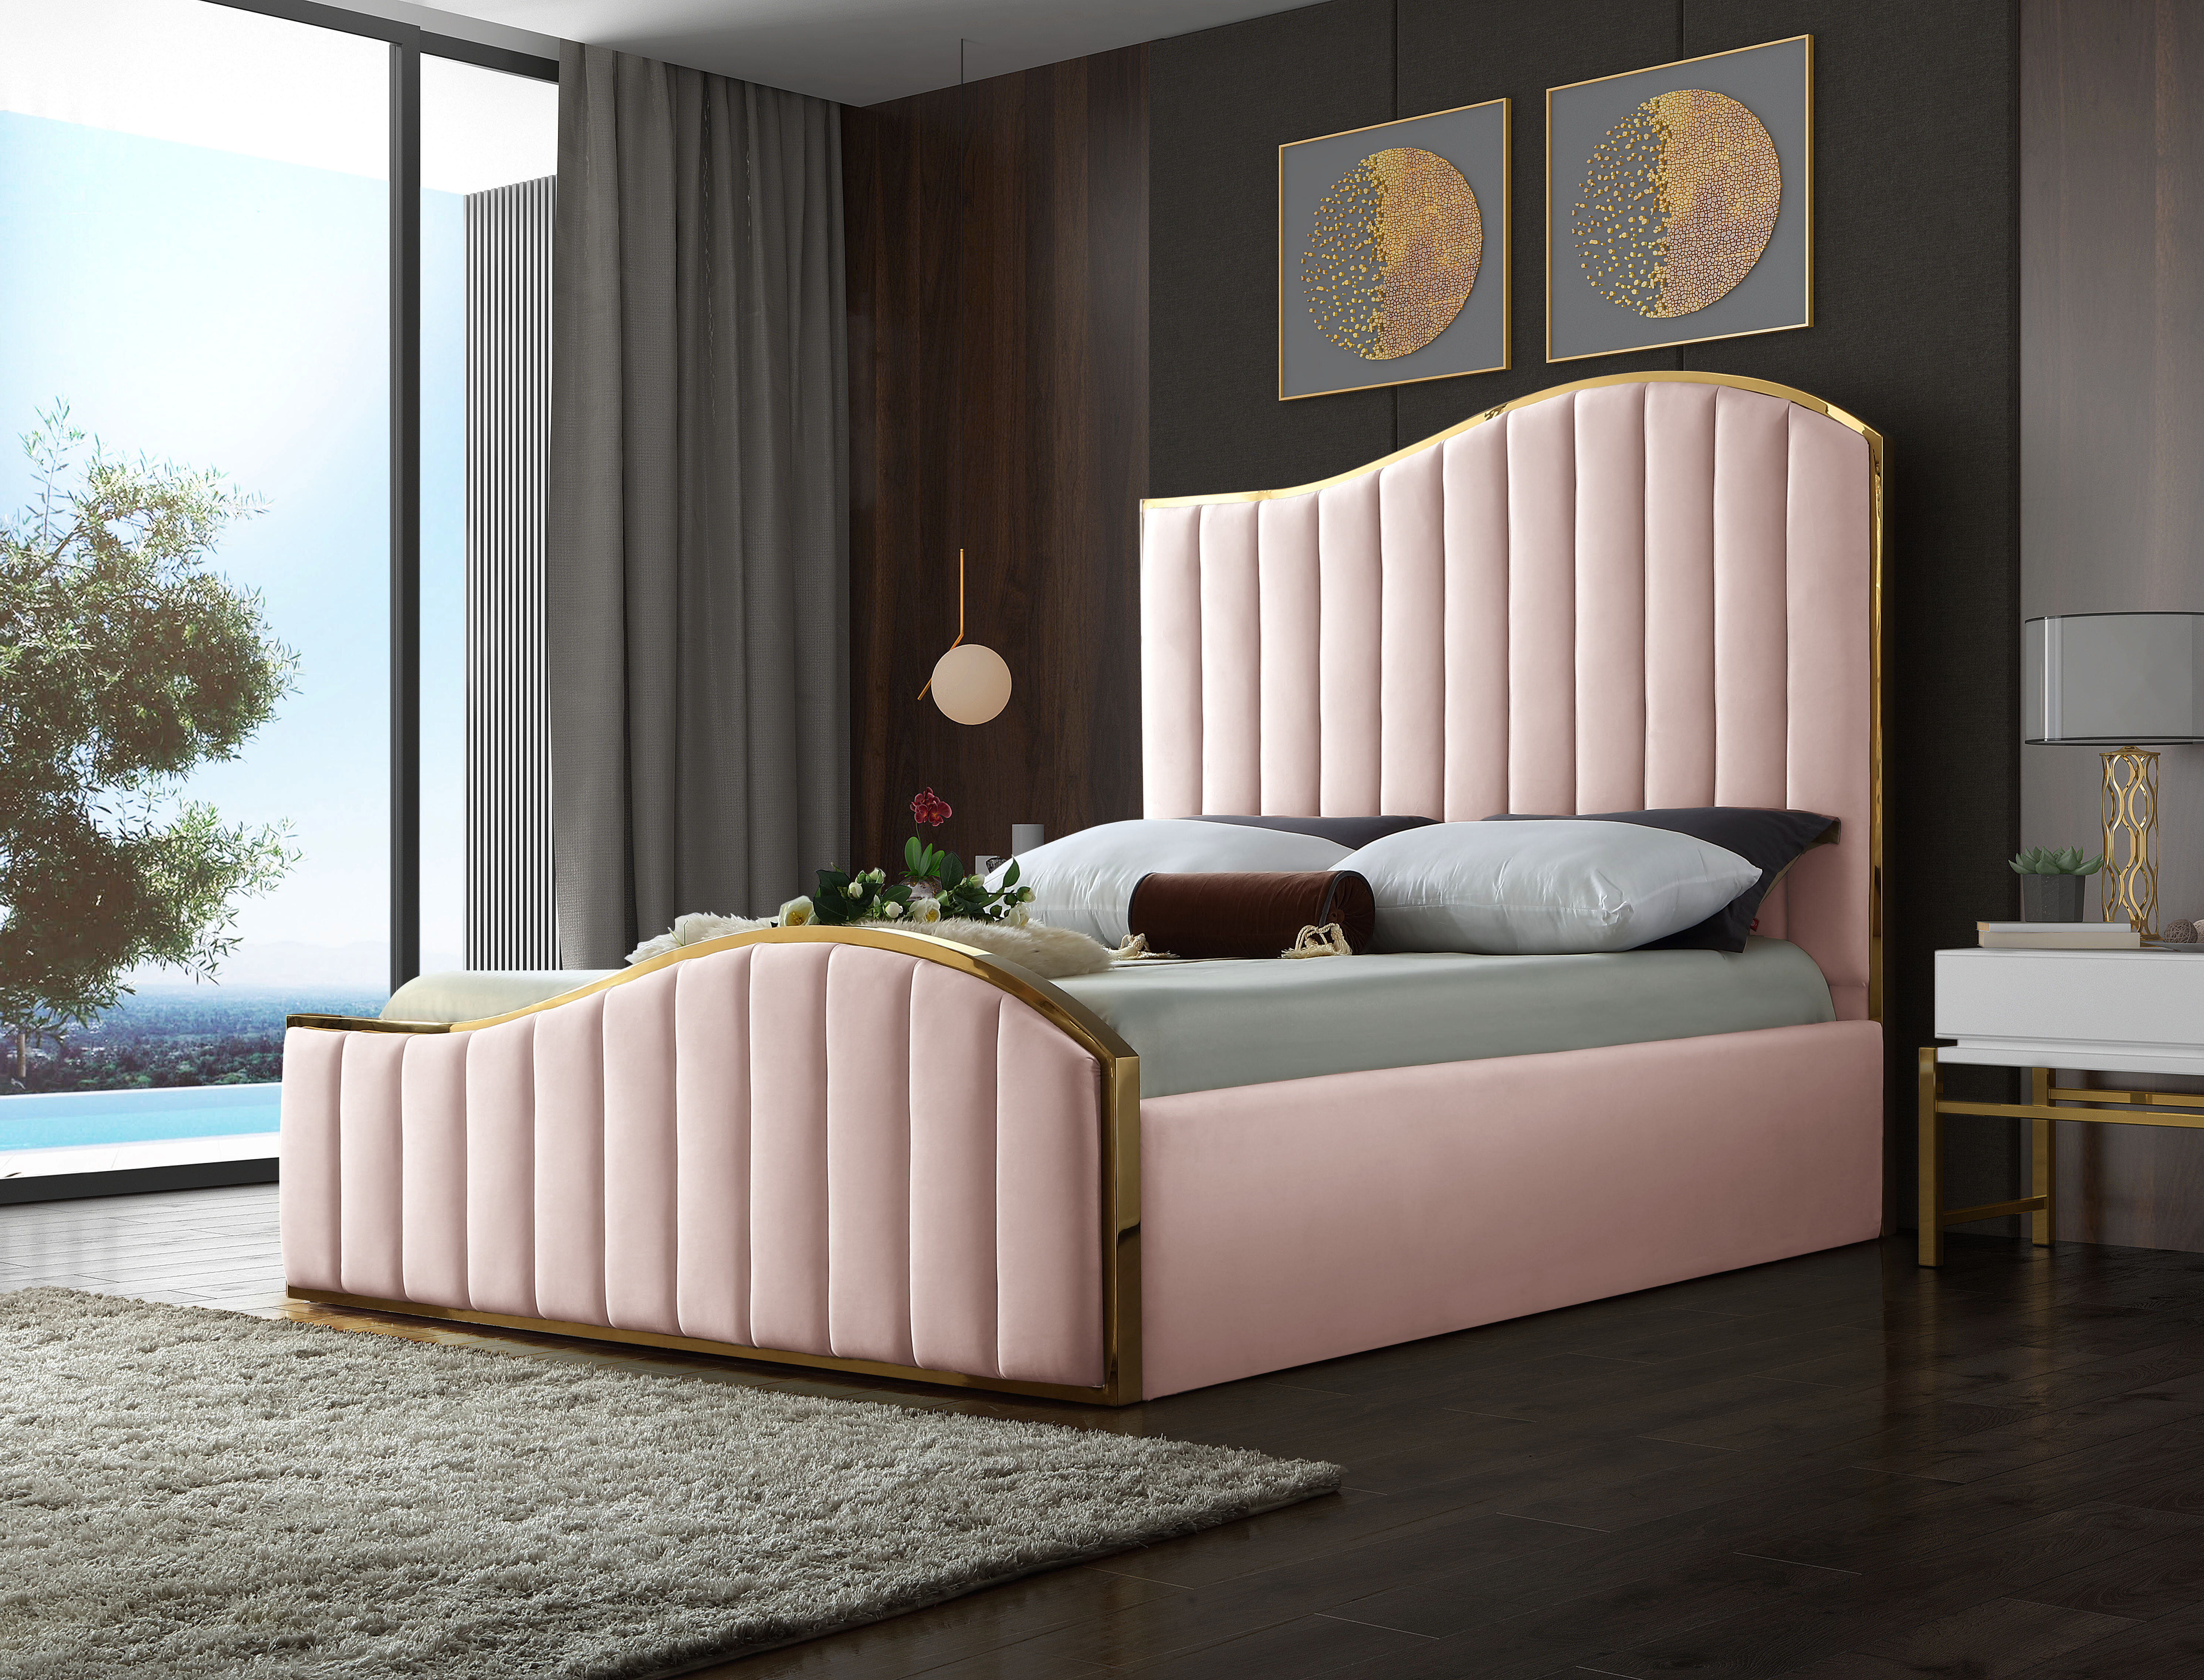 Bed Frame with LED Pink Fabric 5FT King Size Bedroom Room Furniture